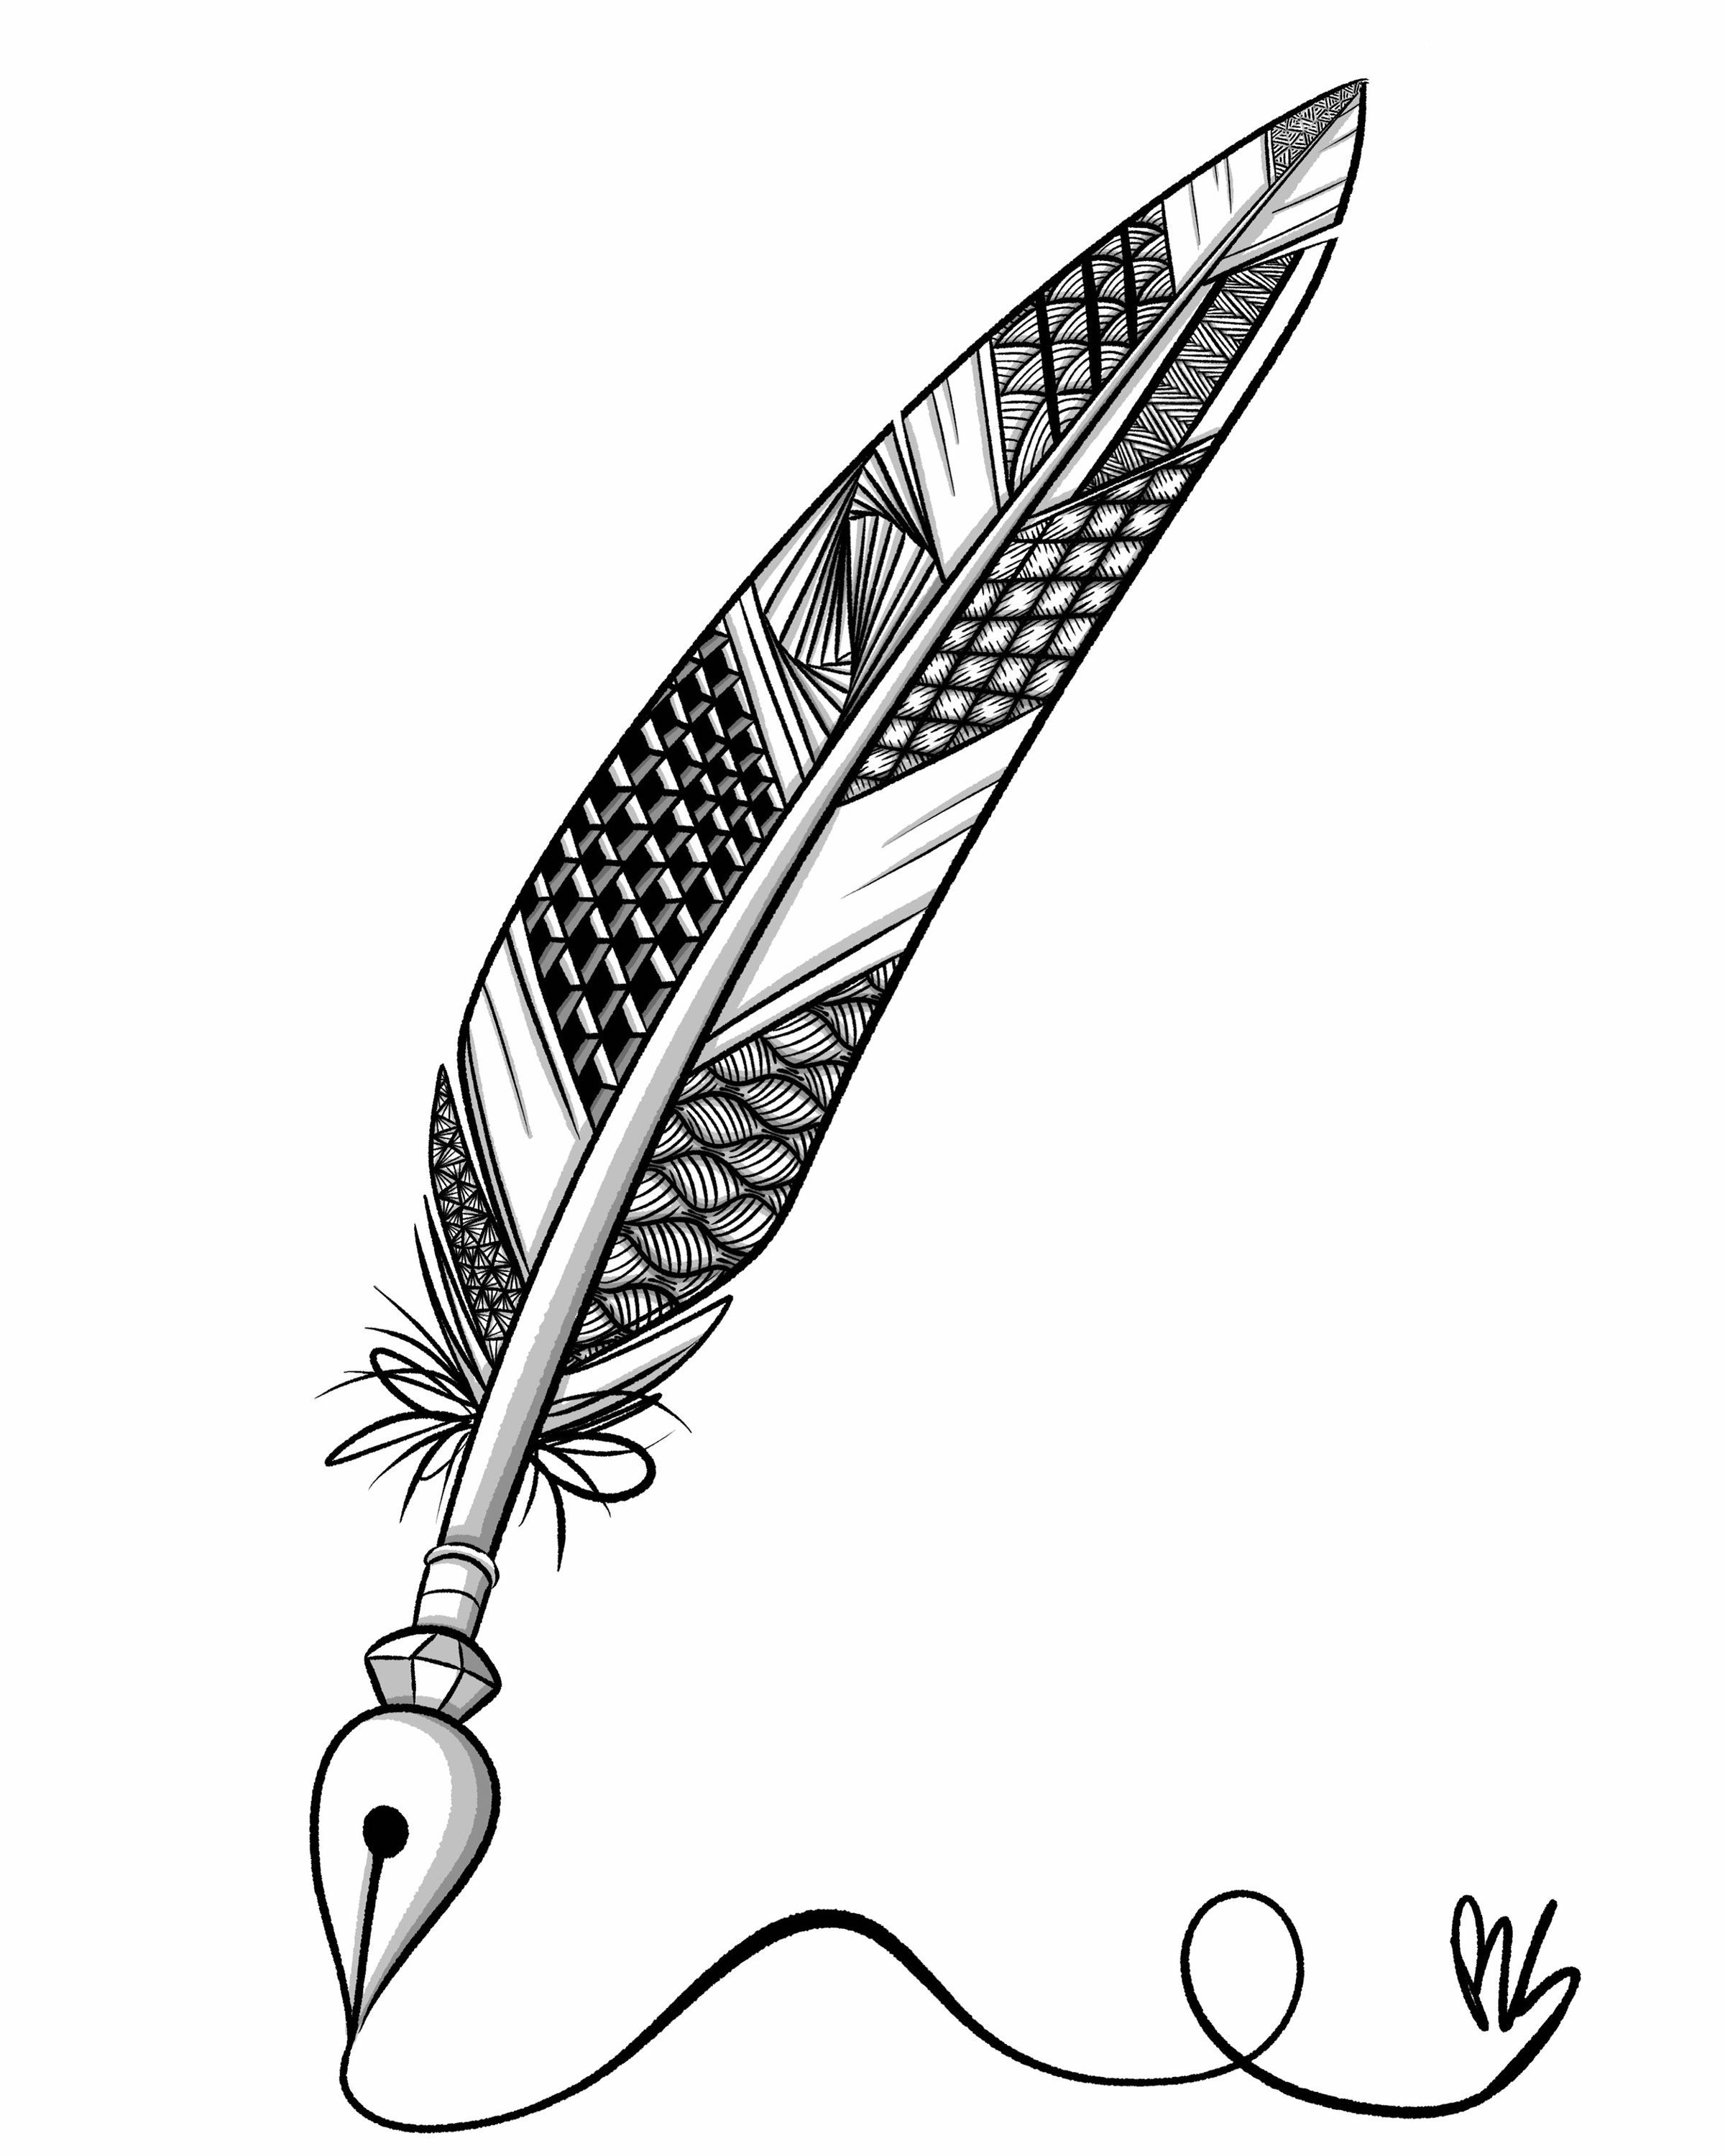 Black and white illustration of quill pen For sale as Framed Prints,  Photos, Wall Art and Photo Gifts